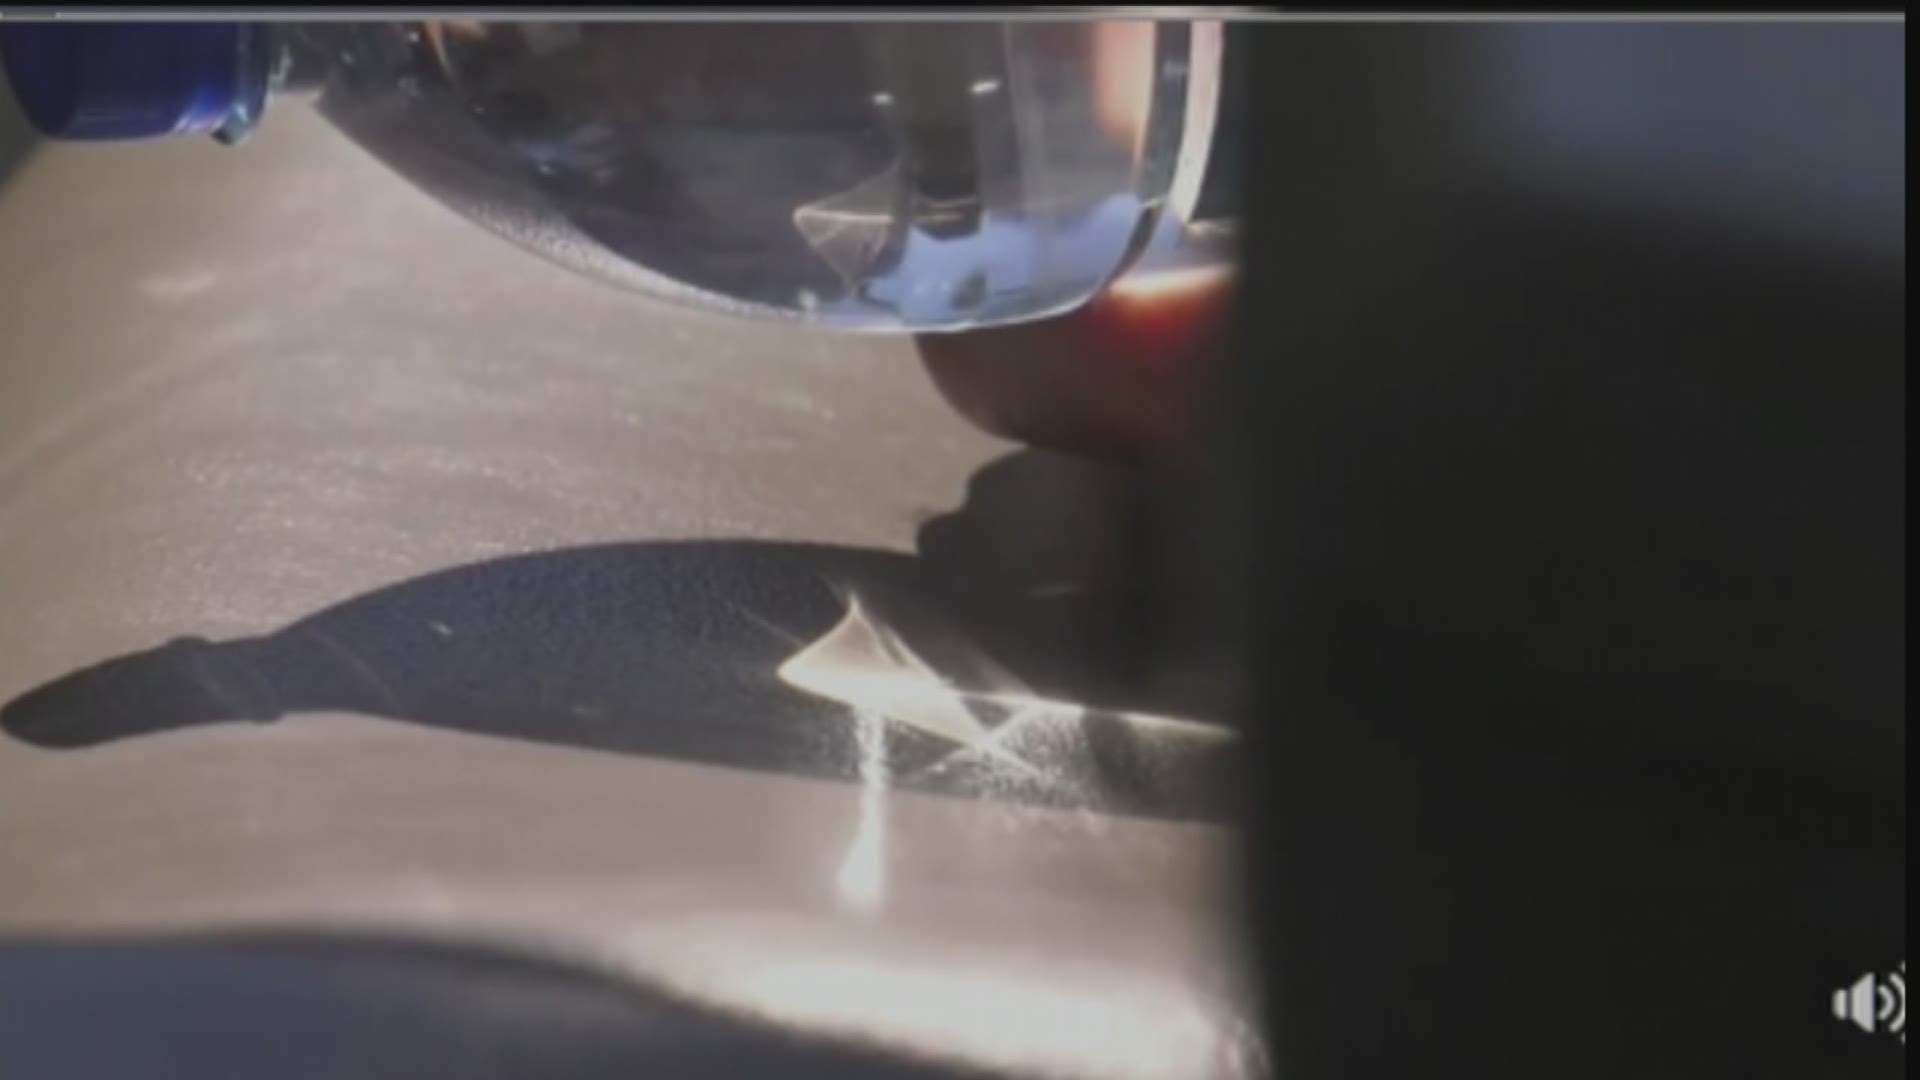 Video posted by Idaho Power shows how a water bottle can potentially start a fire in your car.